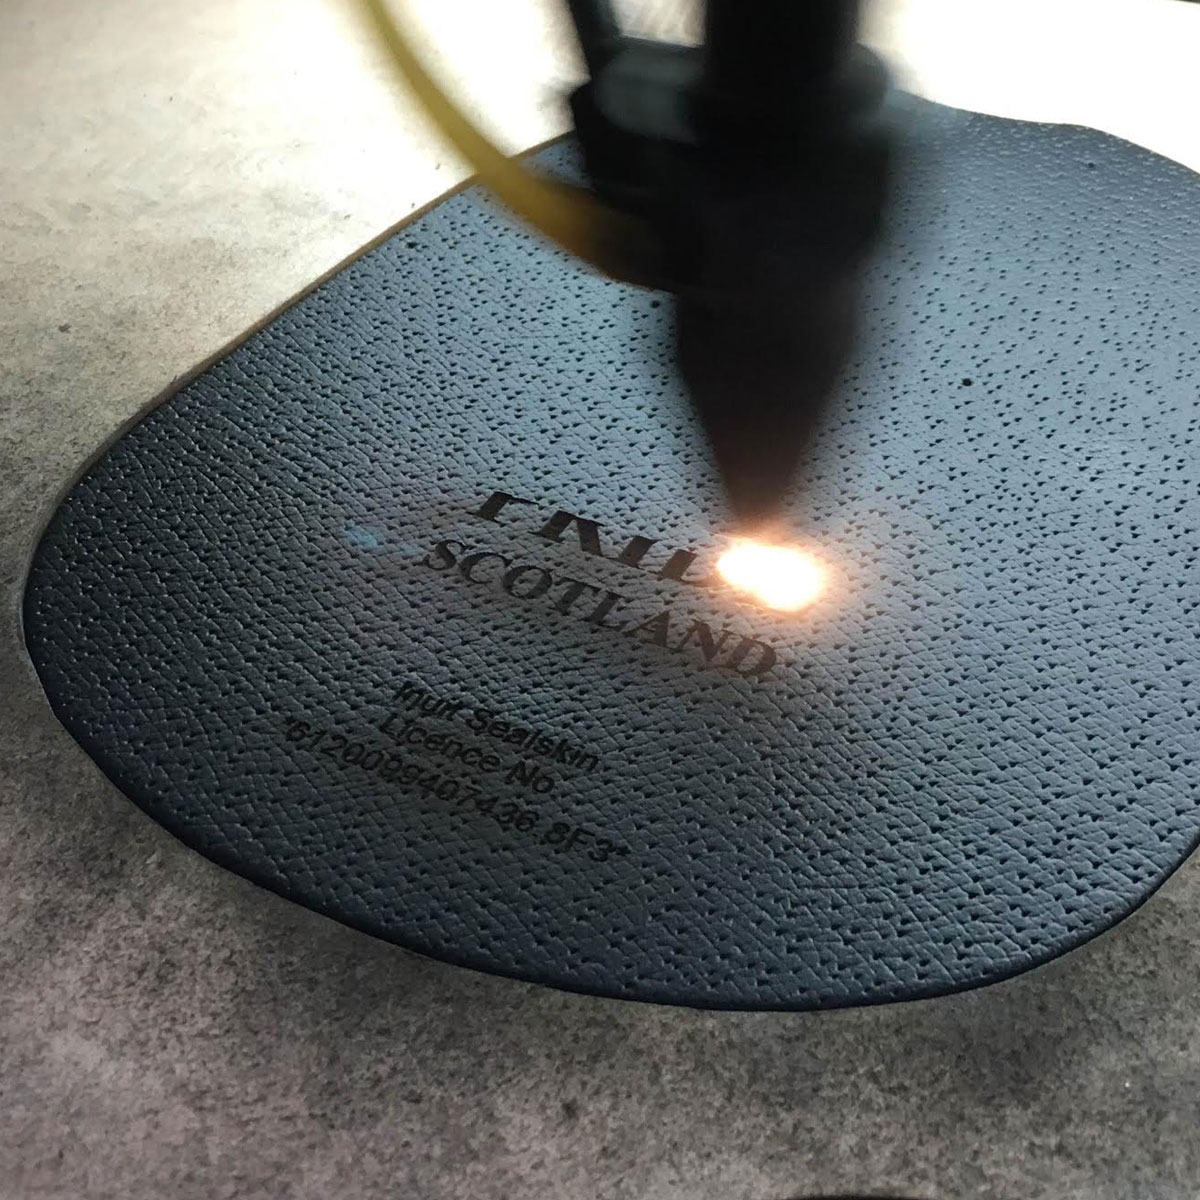 Laser Etching: making your handmade order even more unique